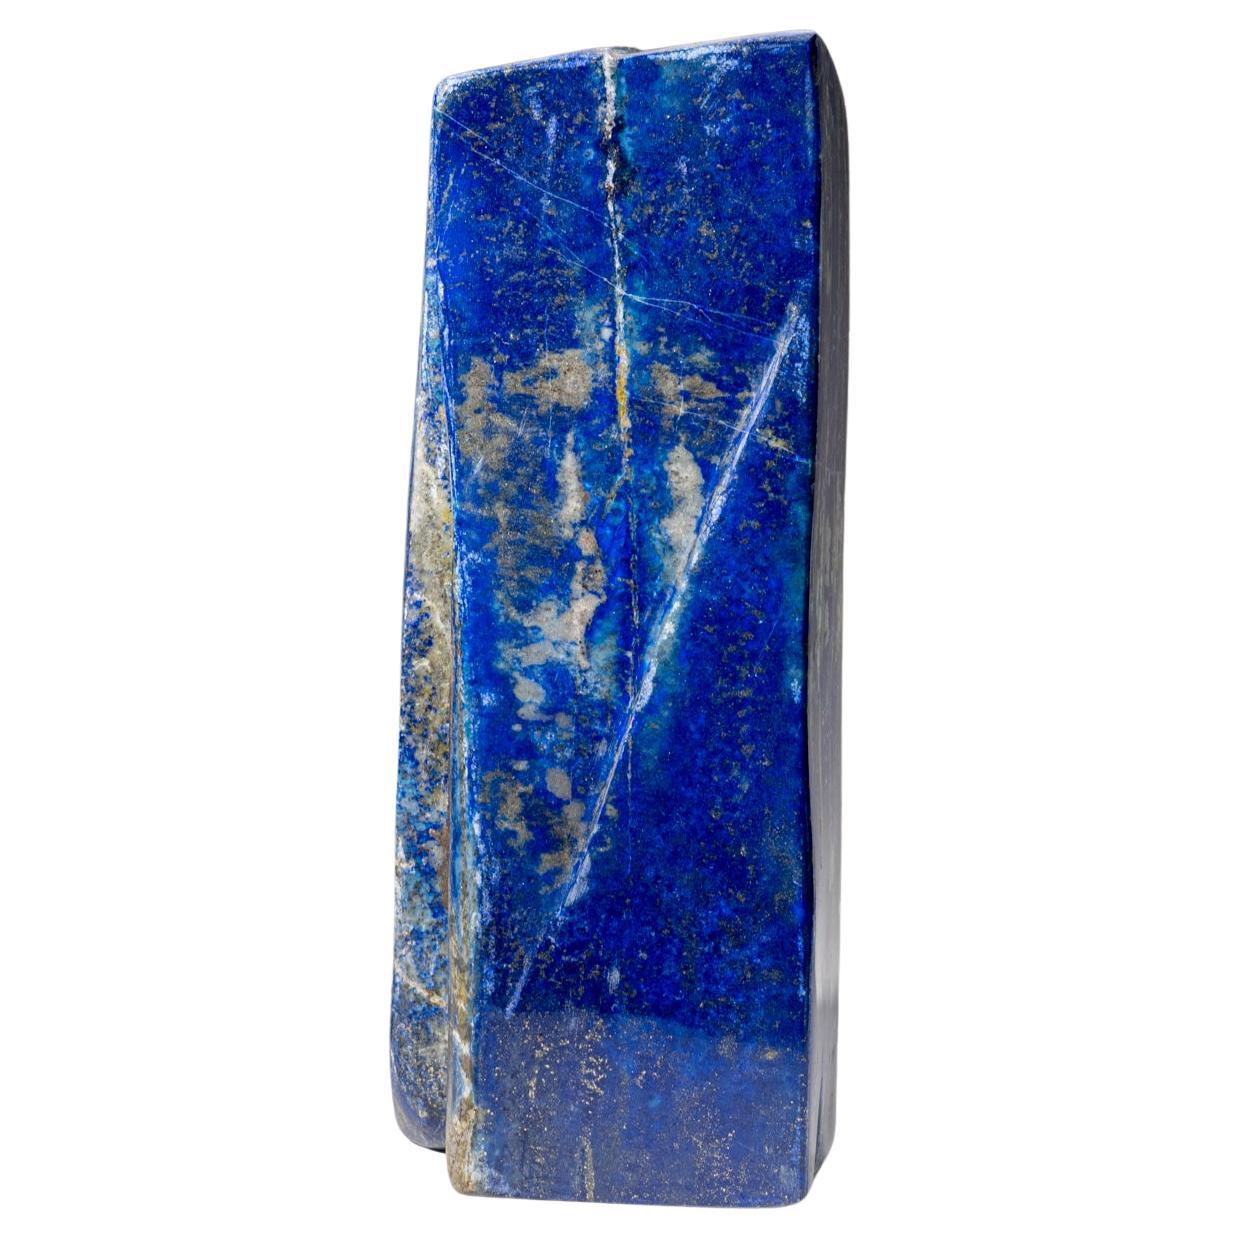 Polished Lapis Lazuli Freeform from Afghanistan (9.7 lbs) For Sale